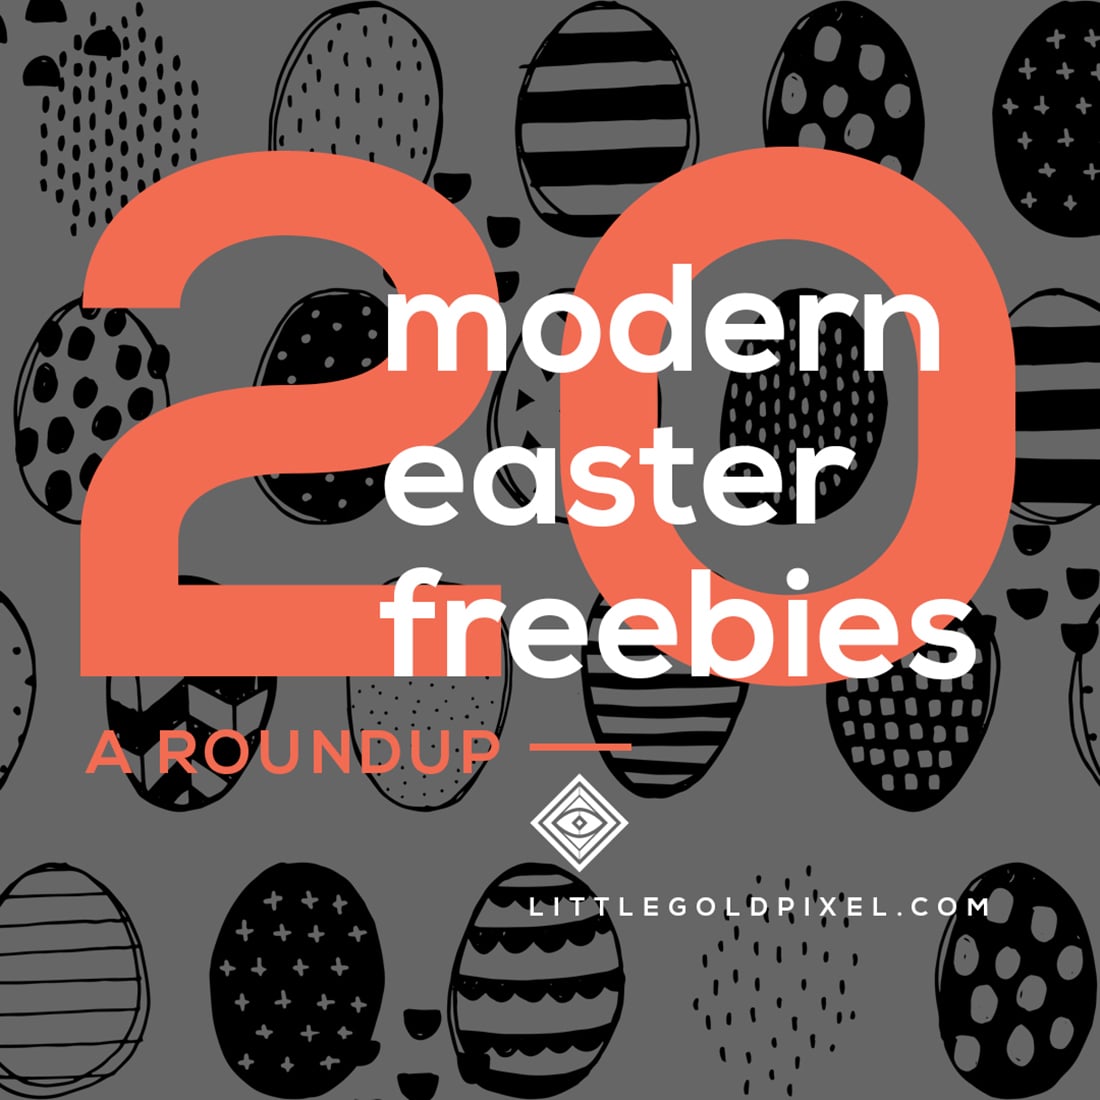 Modern Easter Free Printables • A roundup • Little Gold Pixel